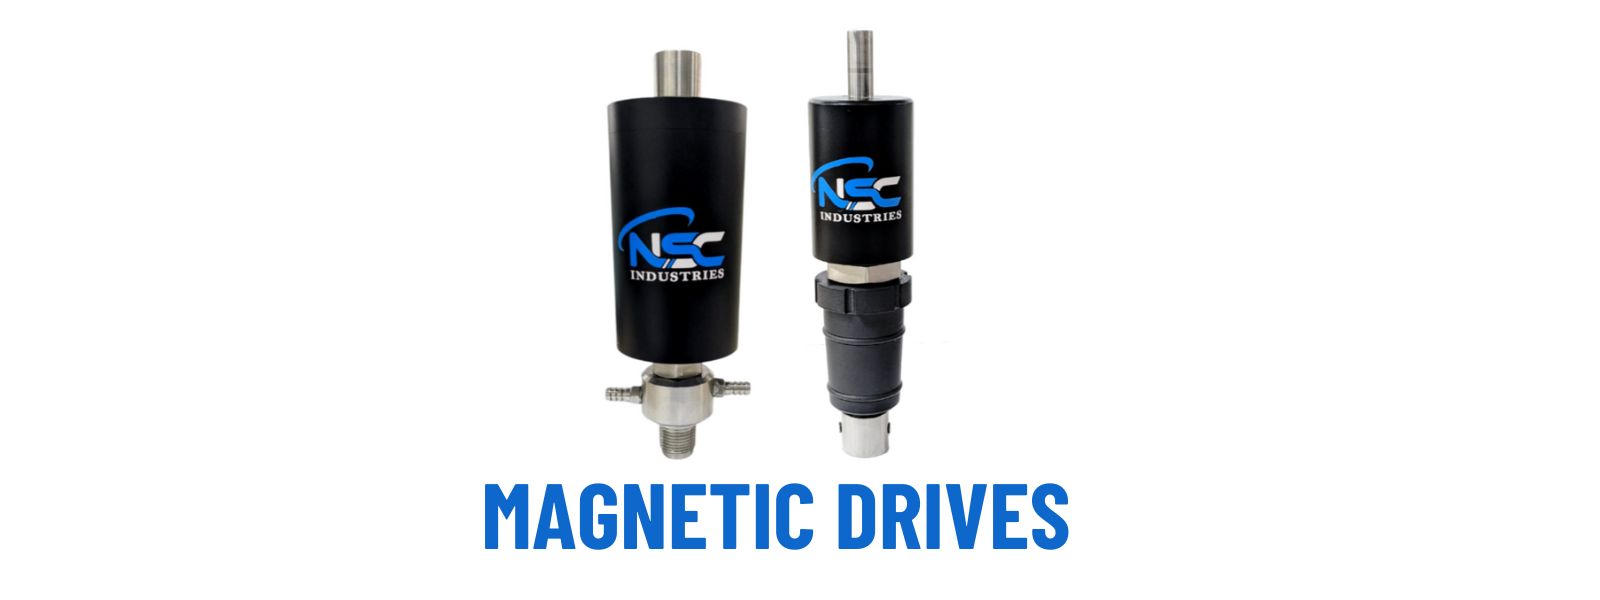 Magnetic Drive manufacturers